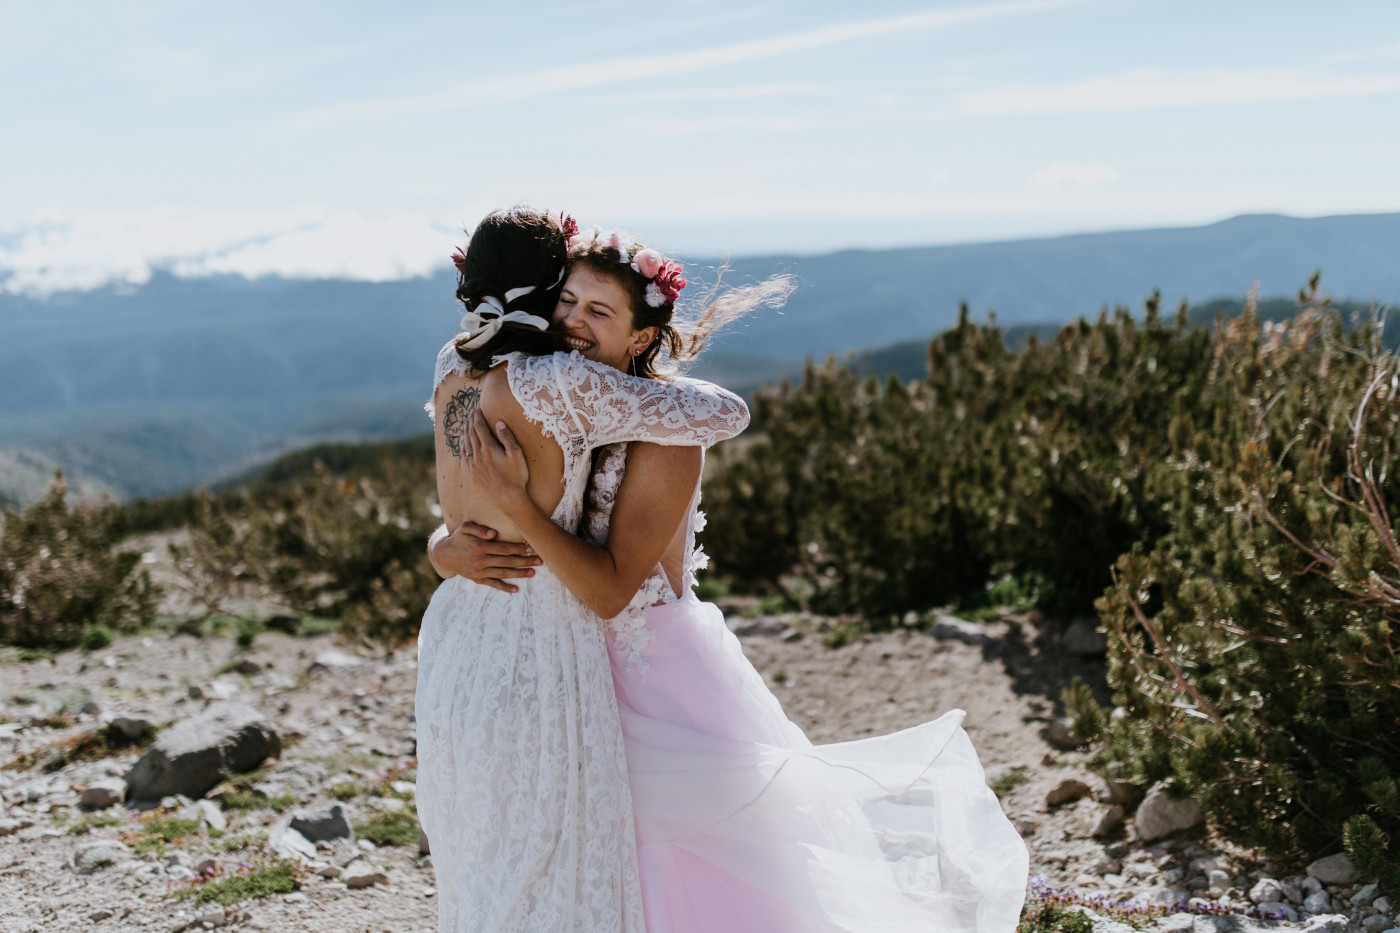 Heather and Margaux hugging with a view of the woods in the background. Elopement photography at Mount Hood by Sienna Plus Josh.